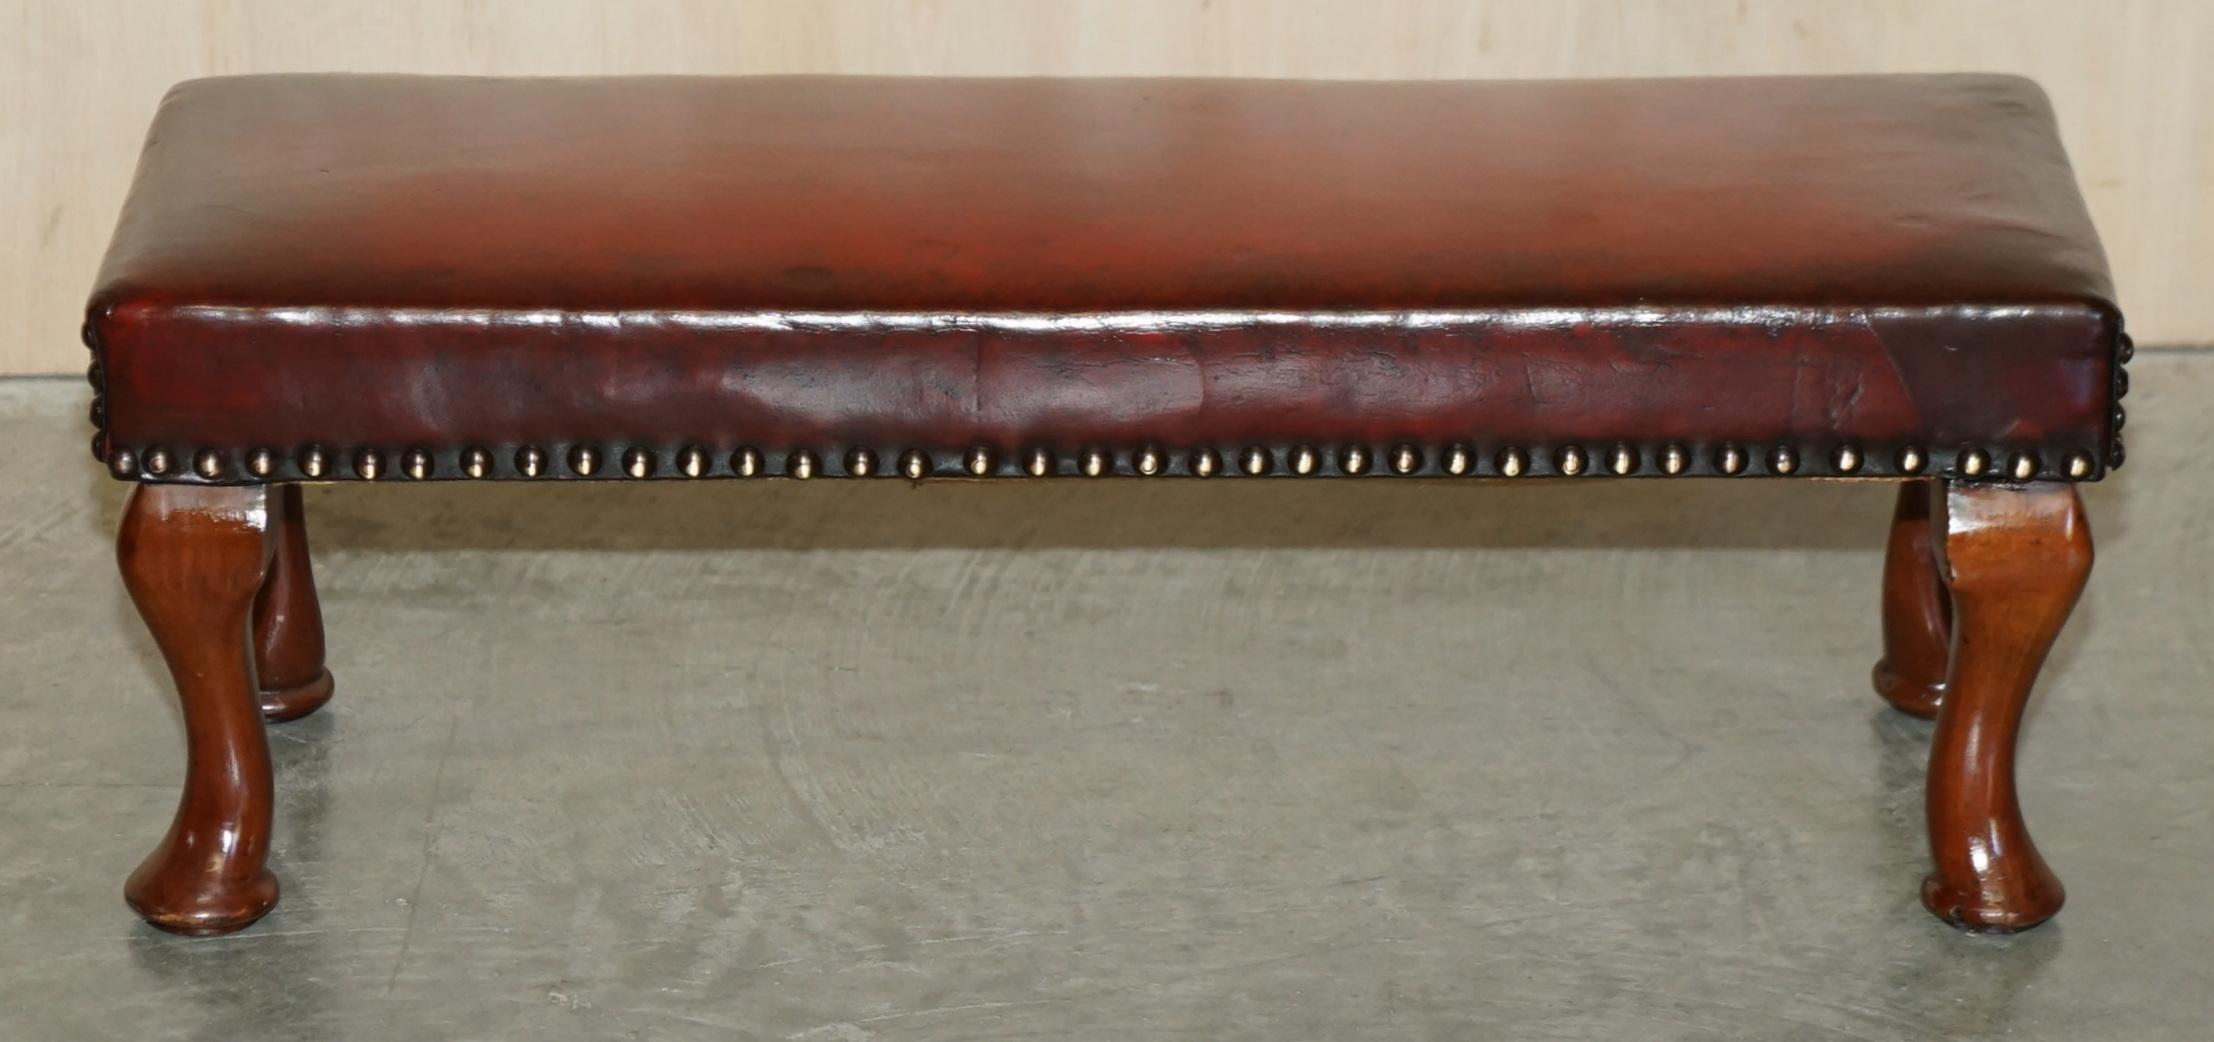 We are delighted to offer for sale this stunning, fully restored hand dyed Bordeaux leather footstool.

A very good looking and well-made stool, it has been upholstered with high grade premium cattle hide leather which has been hand dyed this nice